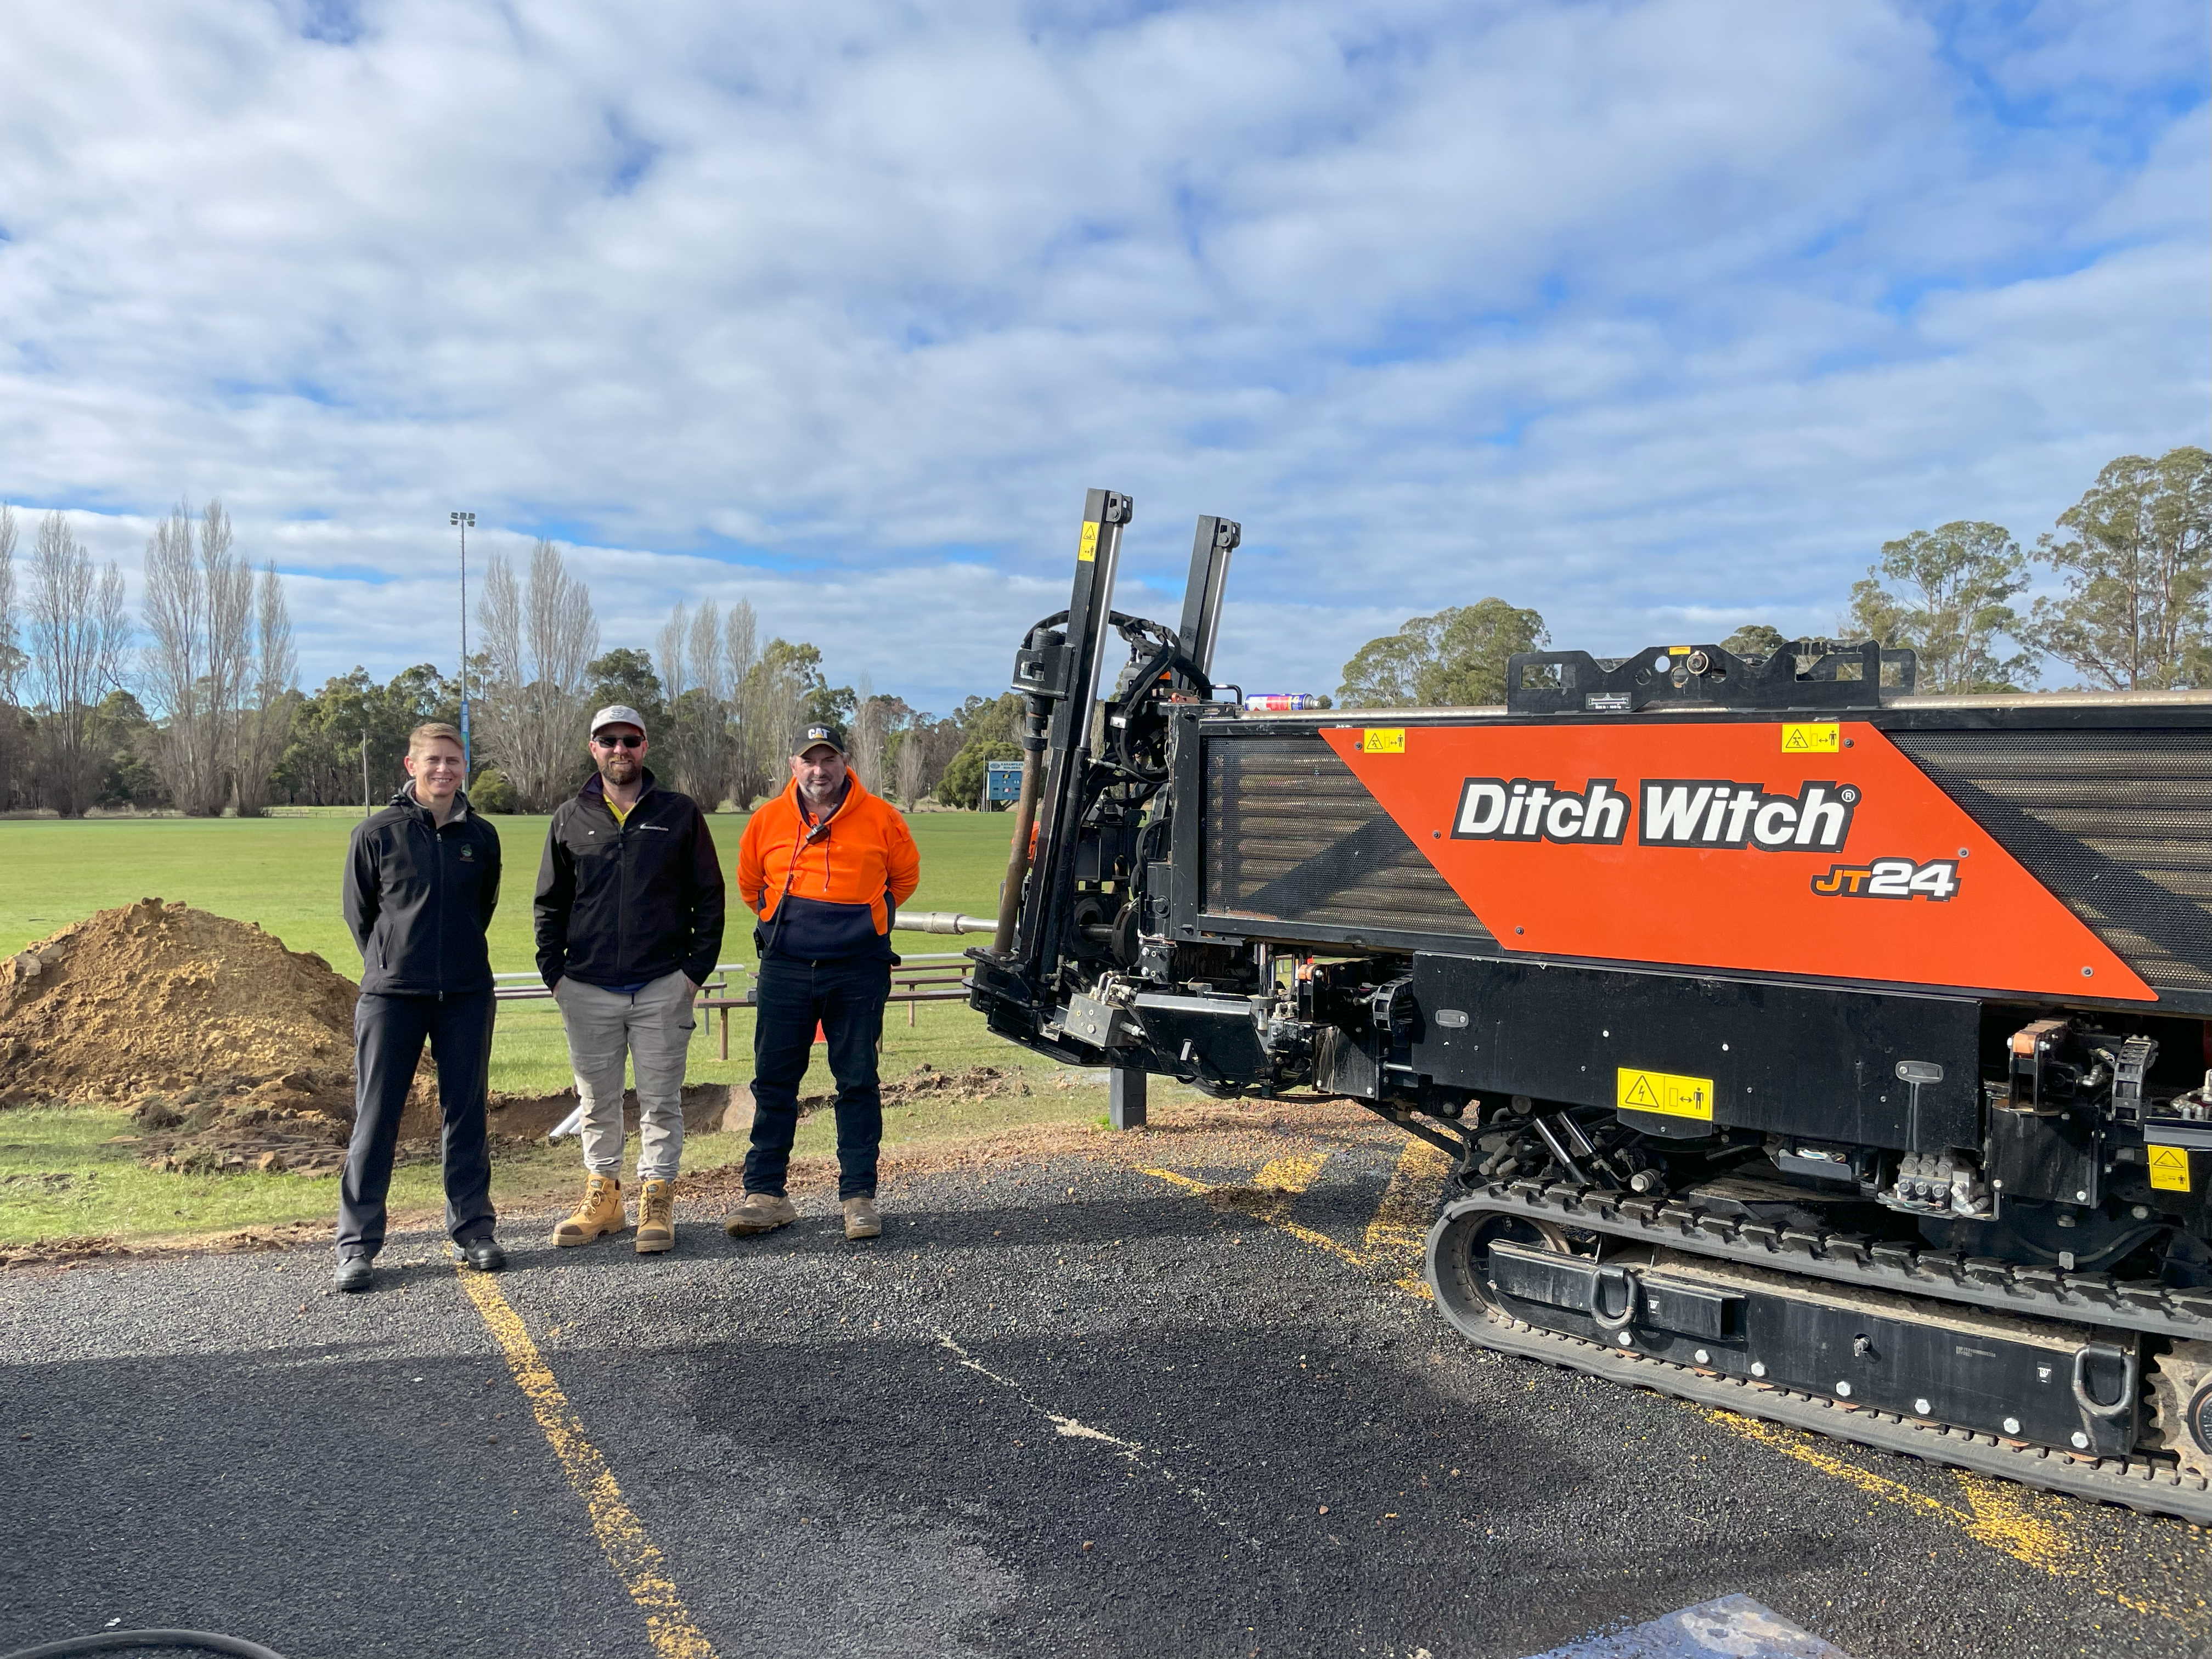 Three people standing next to a ditch witch machine.